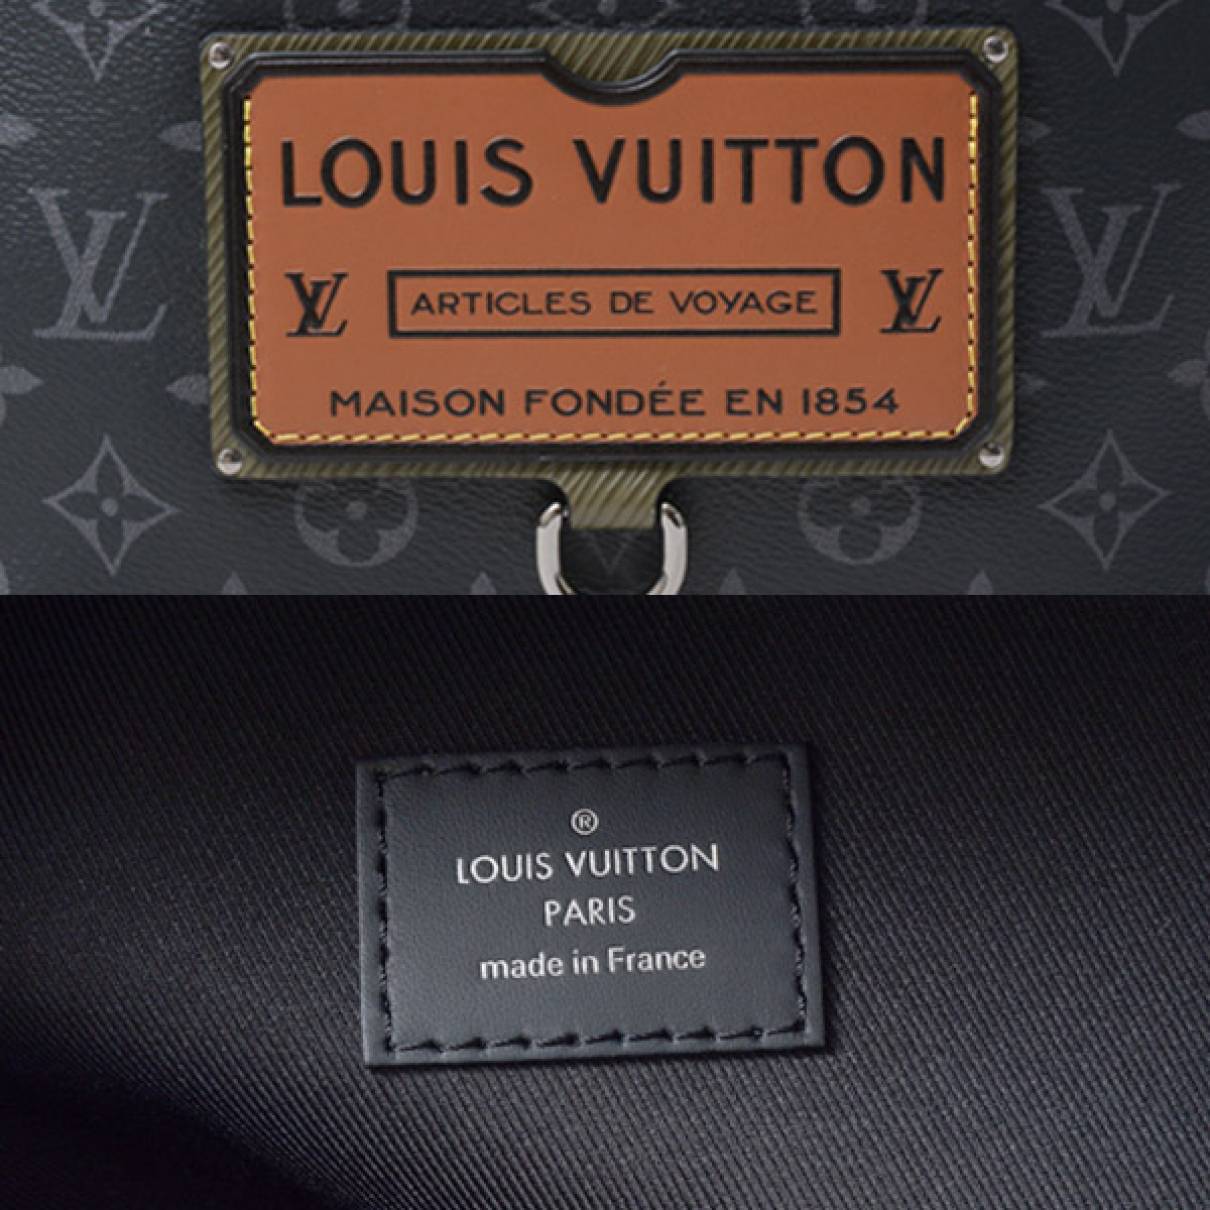 Leather backpack Louis Vuitton Black in Leather - 30715264